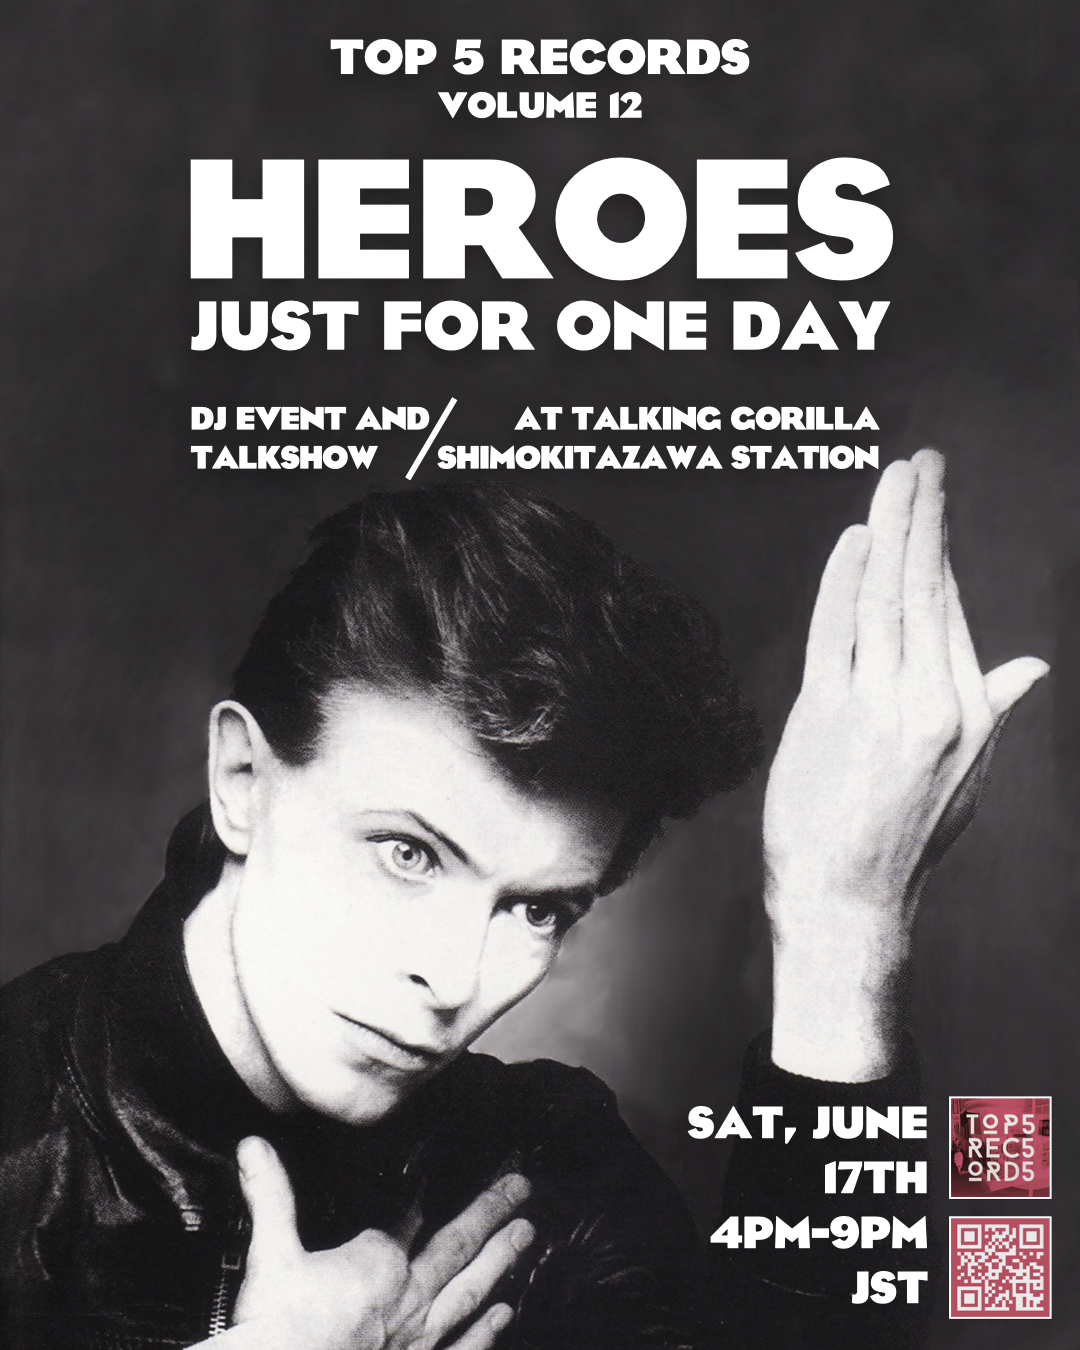 TOP 5 RECORDS – Heroes Just for One Day